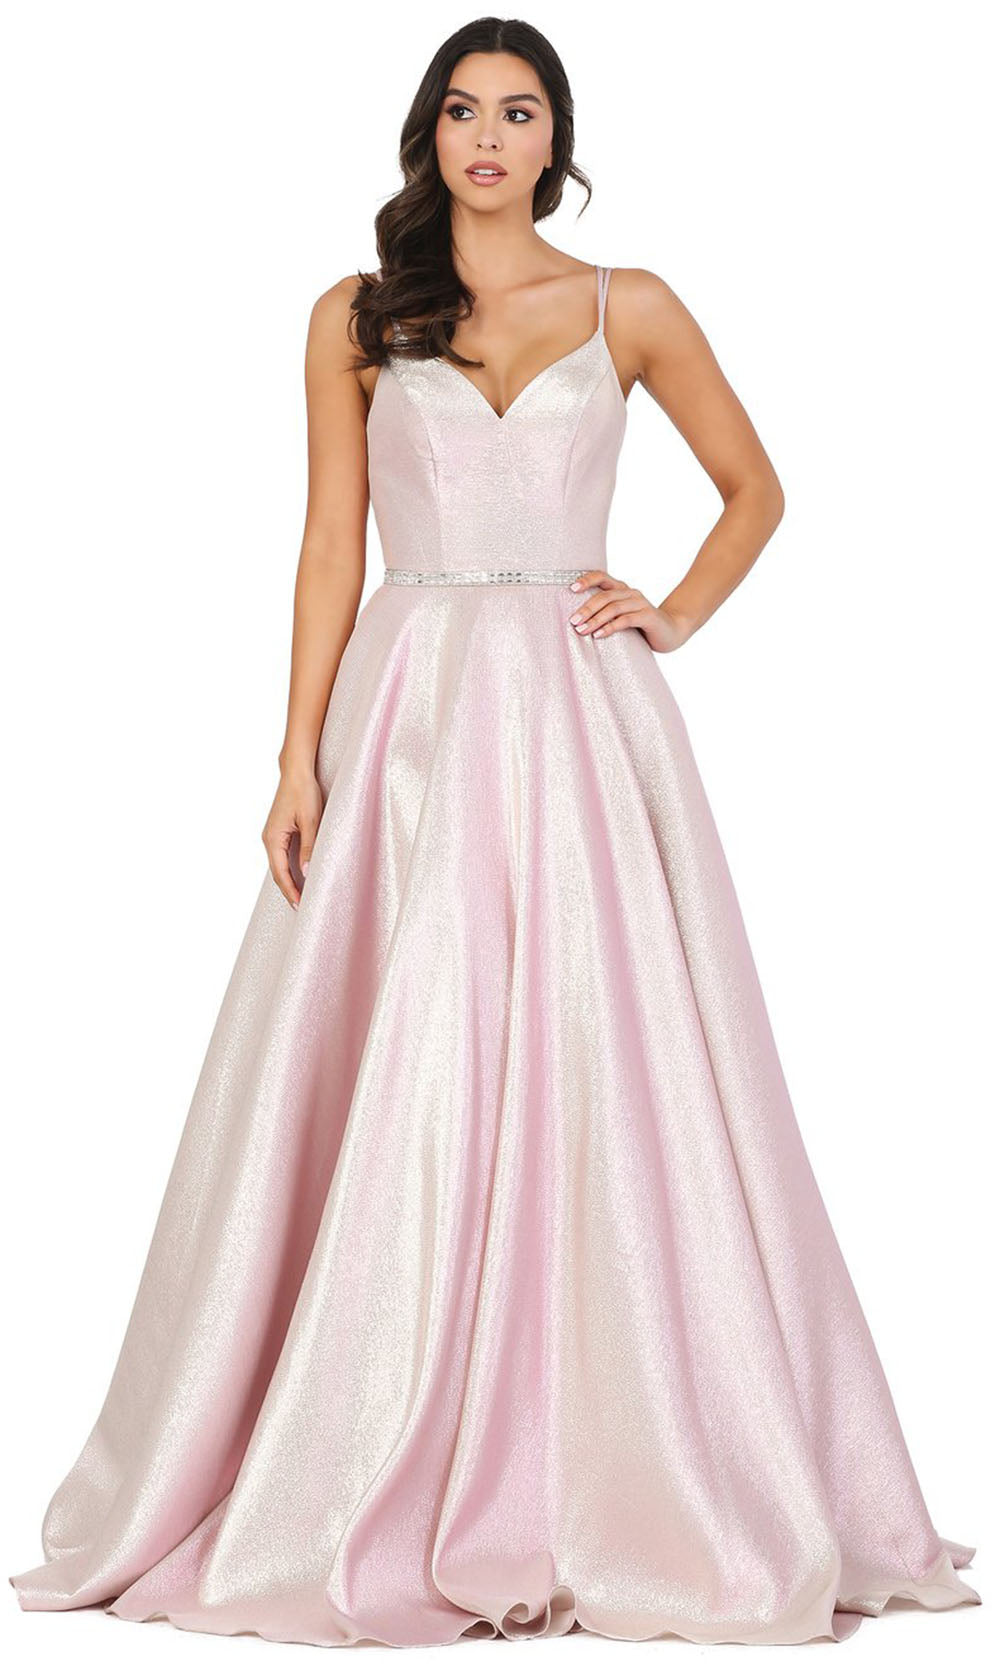 Dancing Queen - 2958 V Neck Minimalist Shiny Prom Dress In Pink